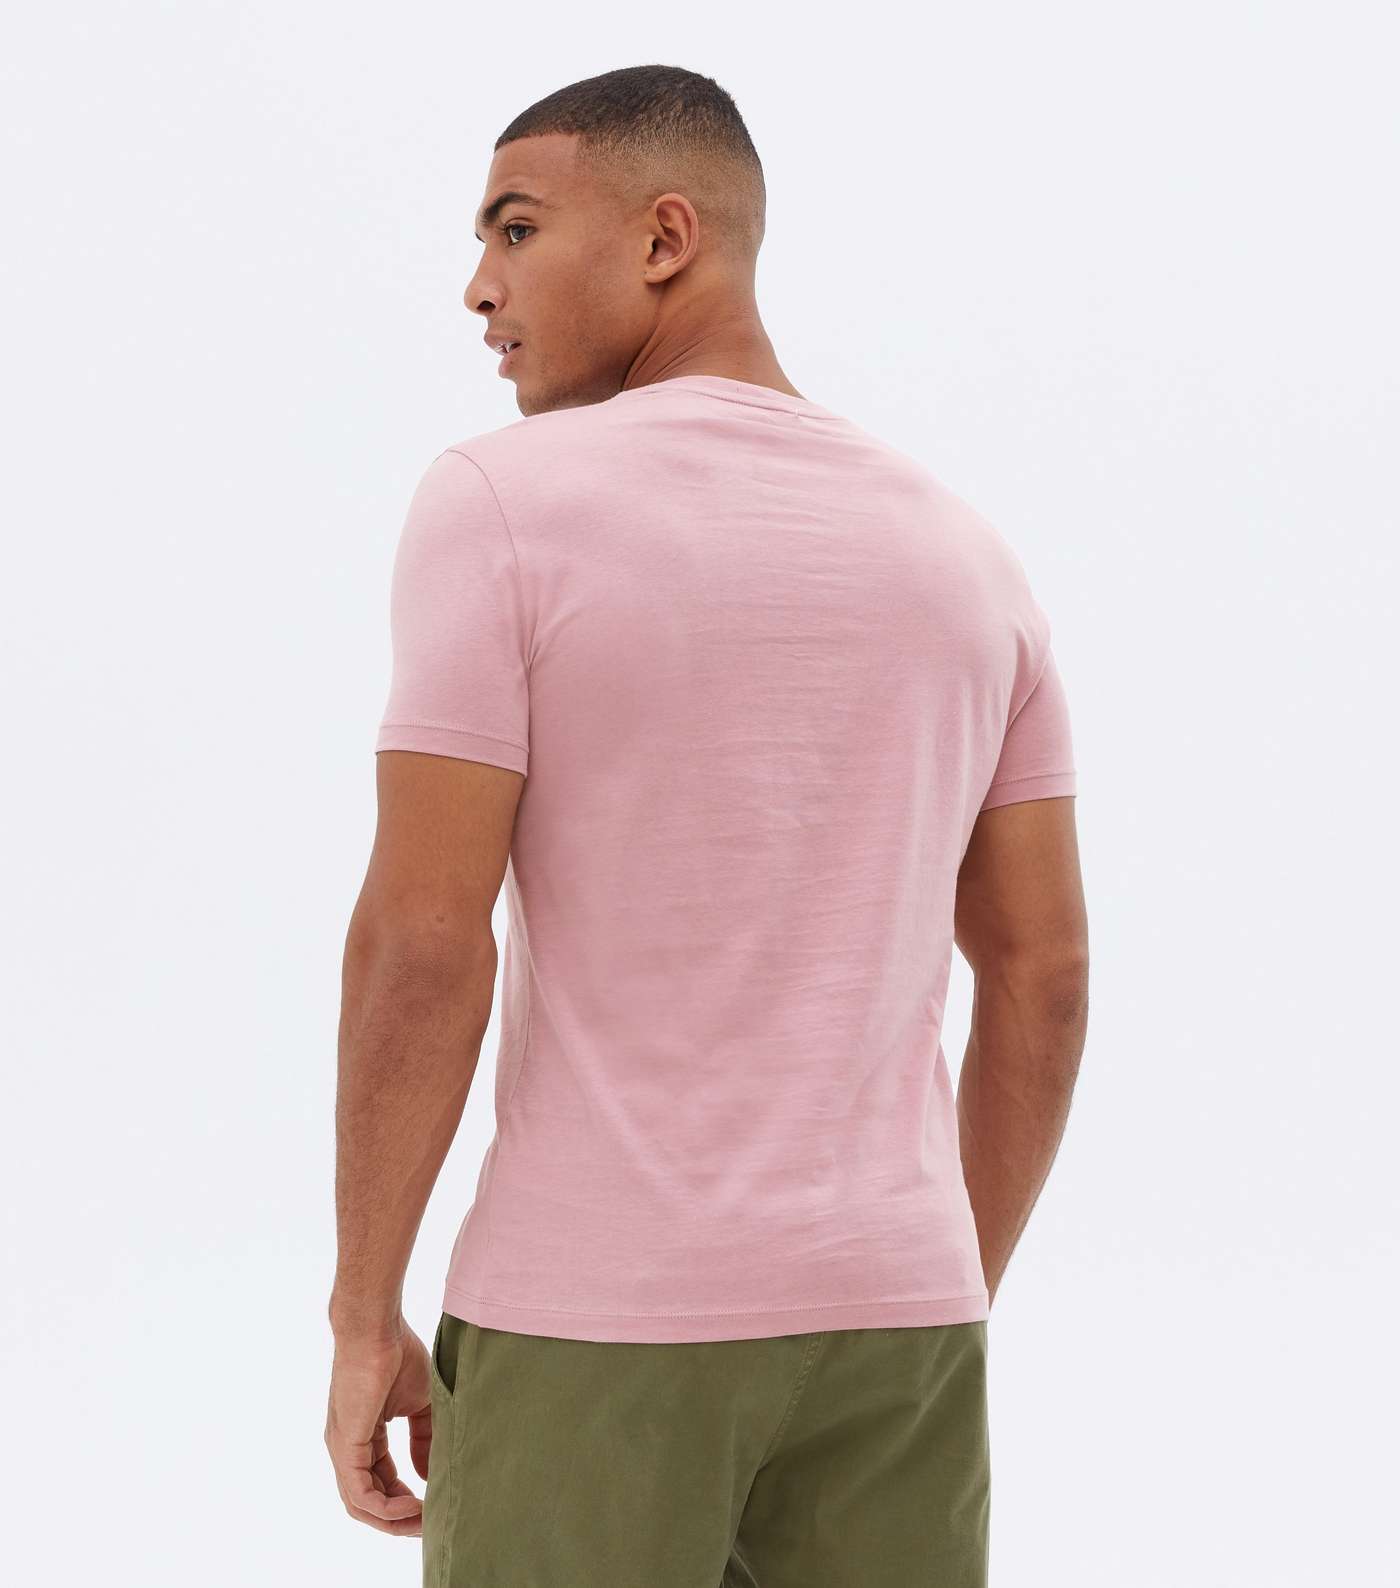 Mid Pink Short Sleeve Muscle Fit Crew T-Shirt Image 4